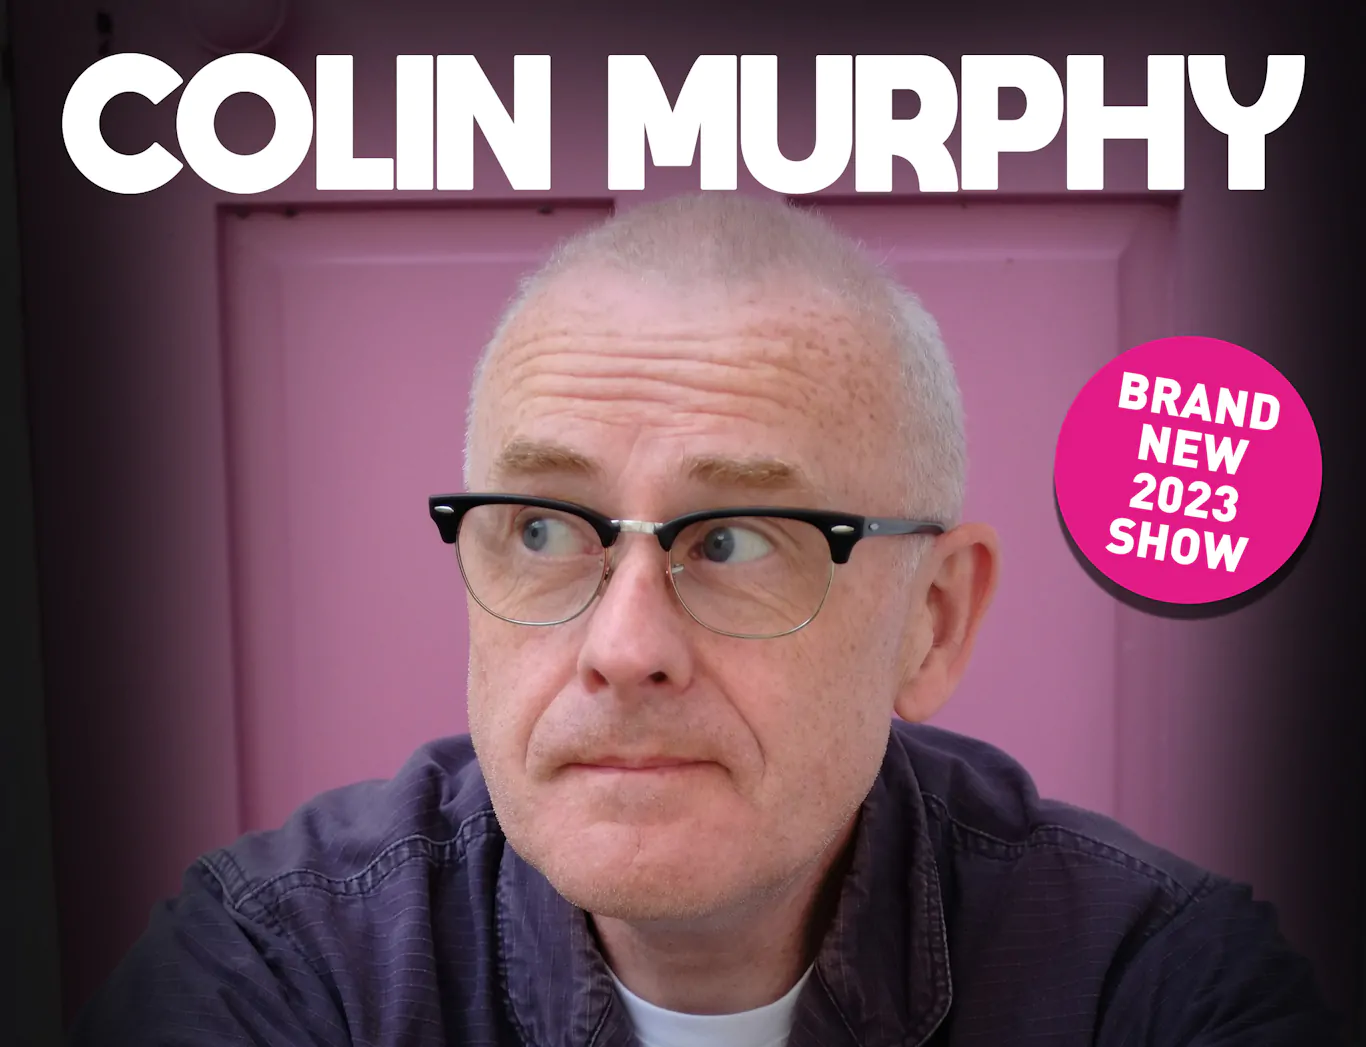 COLIN MURPHY announces three shows at The Grand Opera House, Belfast, from 29th June – 1st July 2023